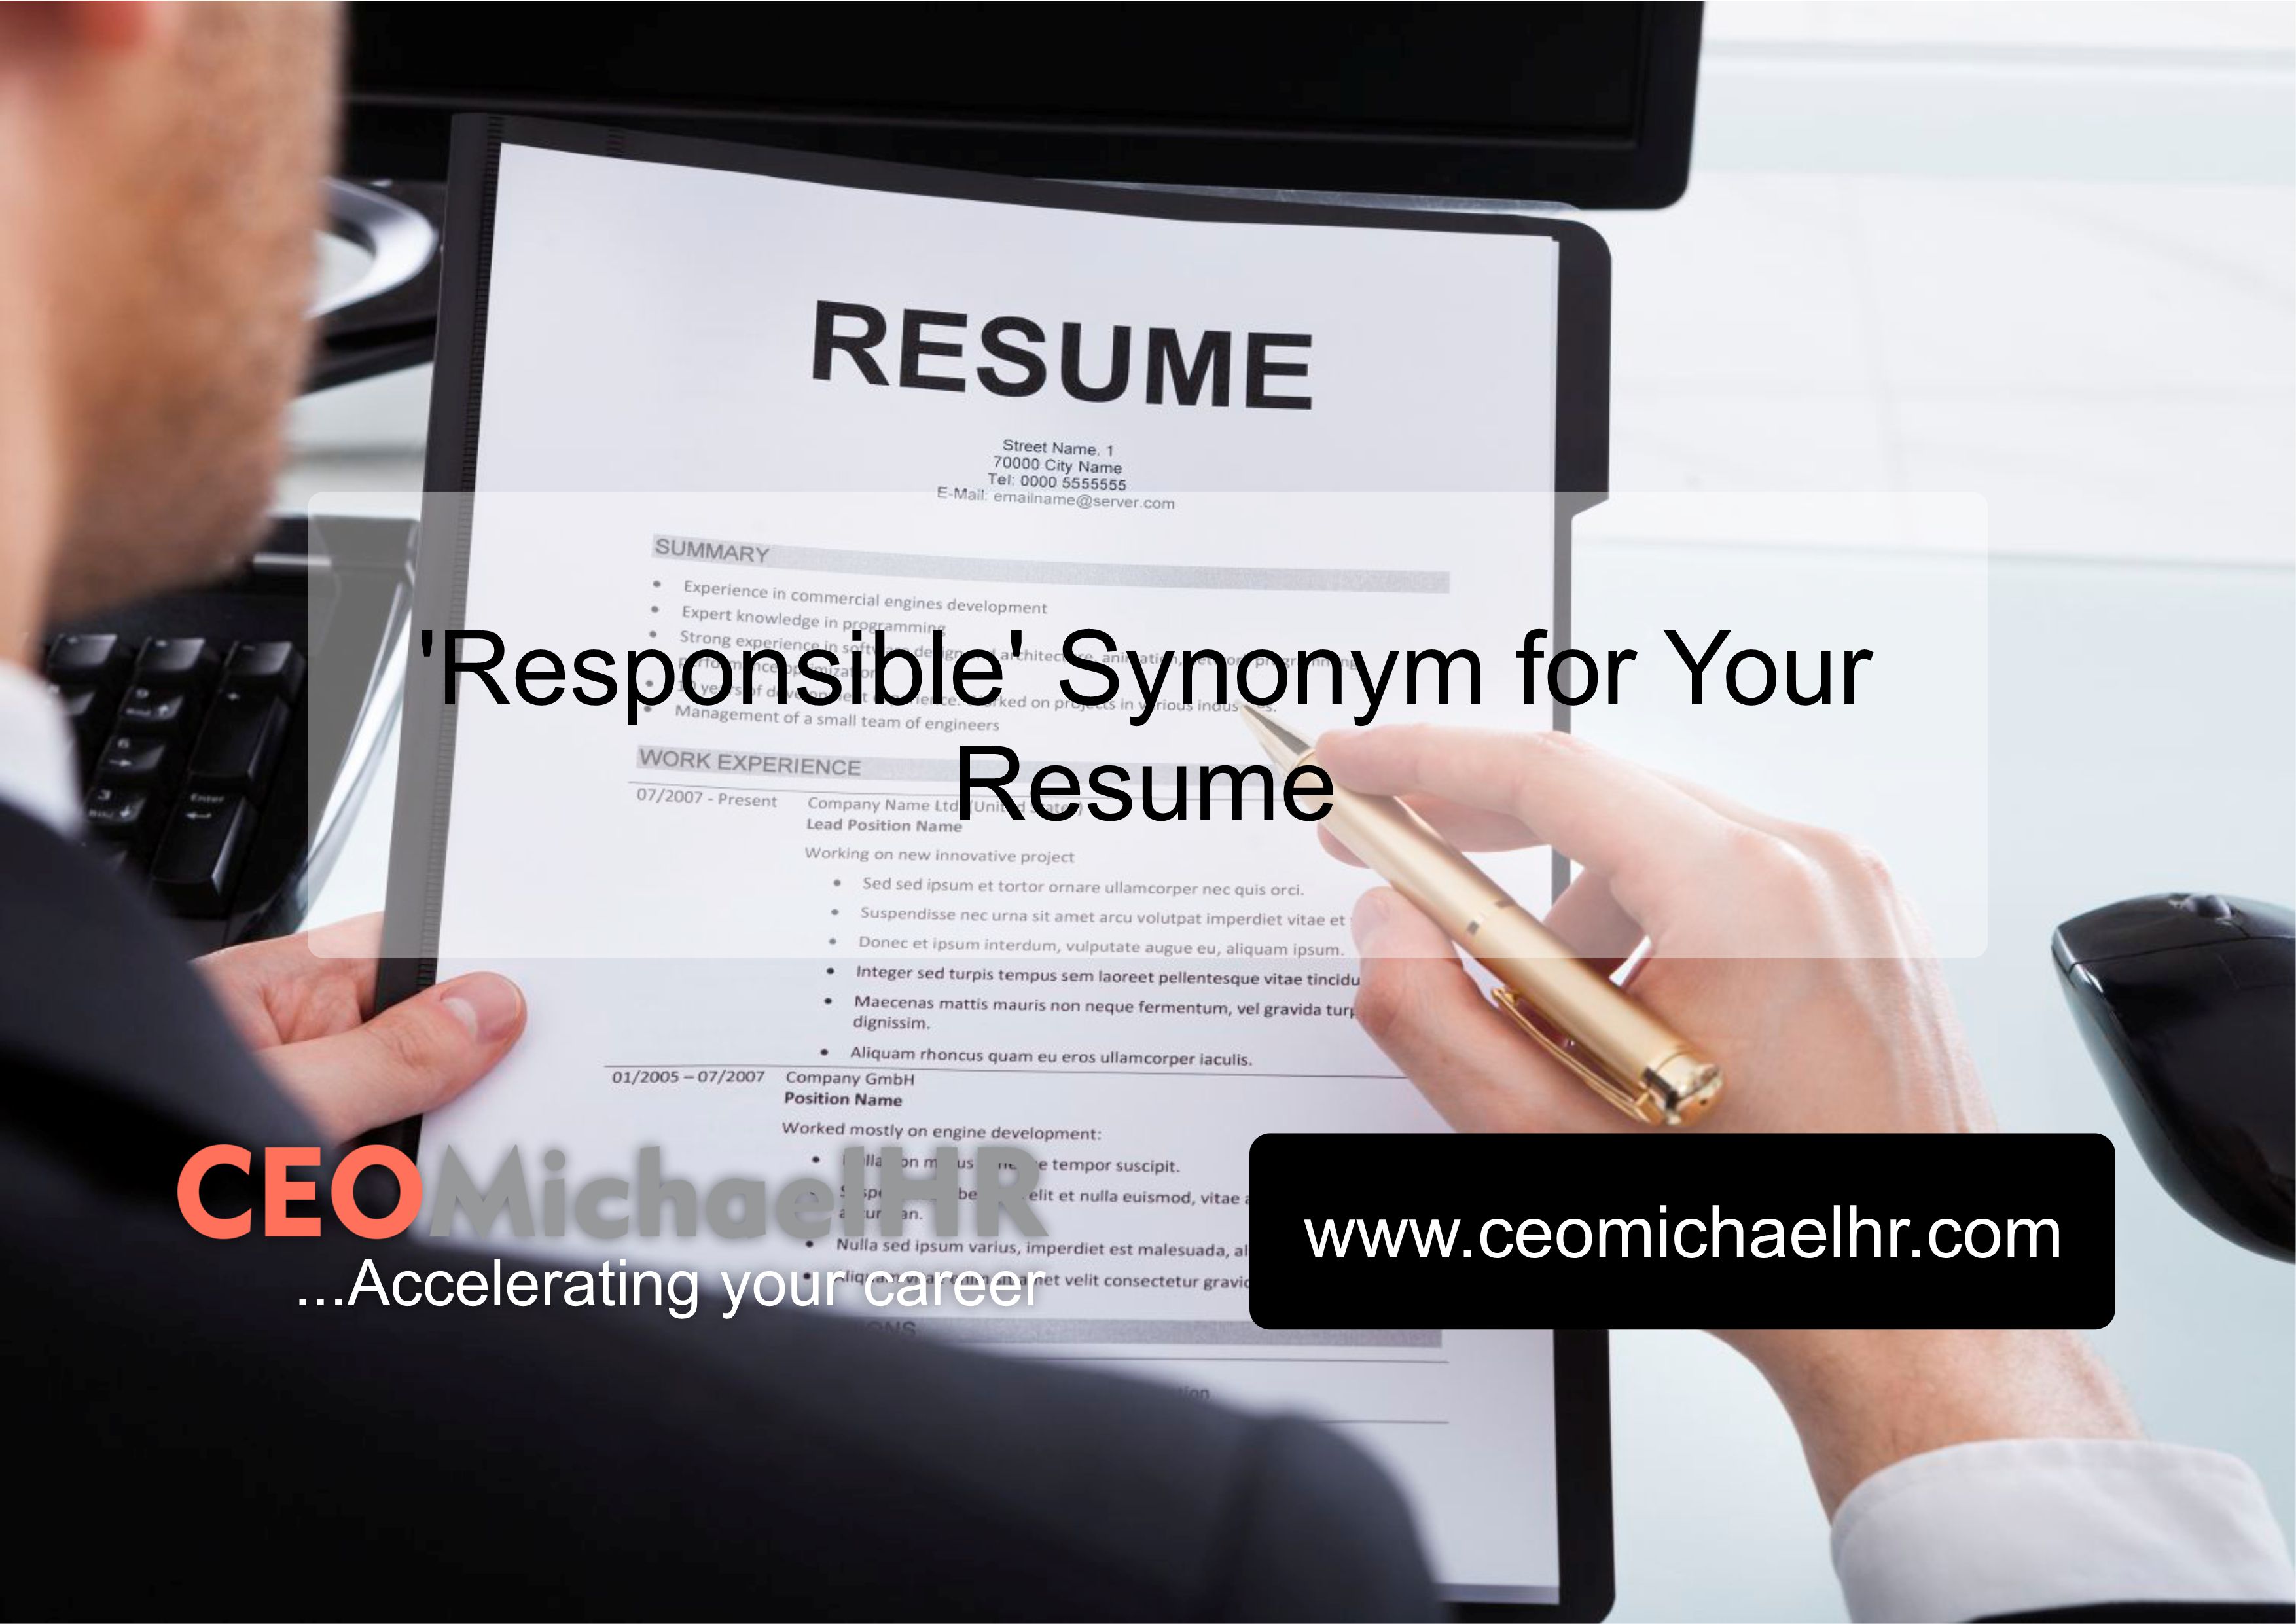 another word for responsible in resume